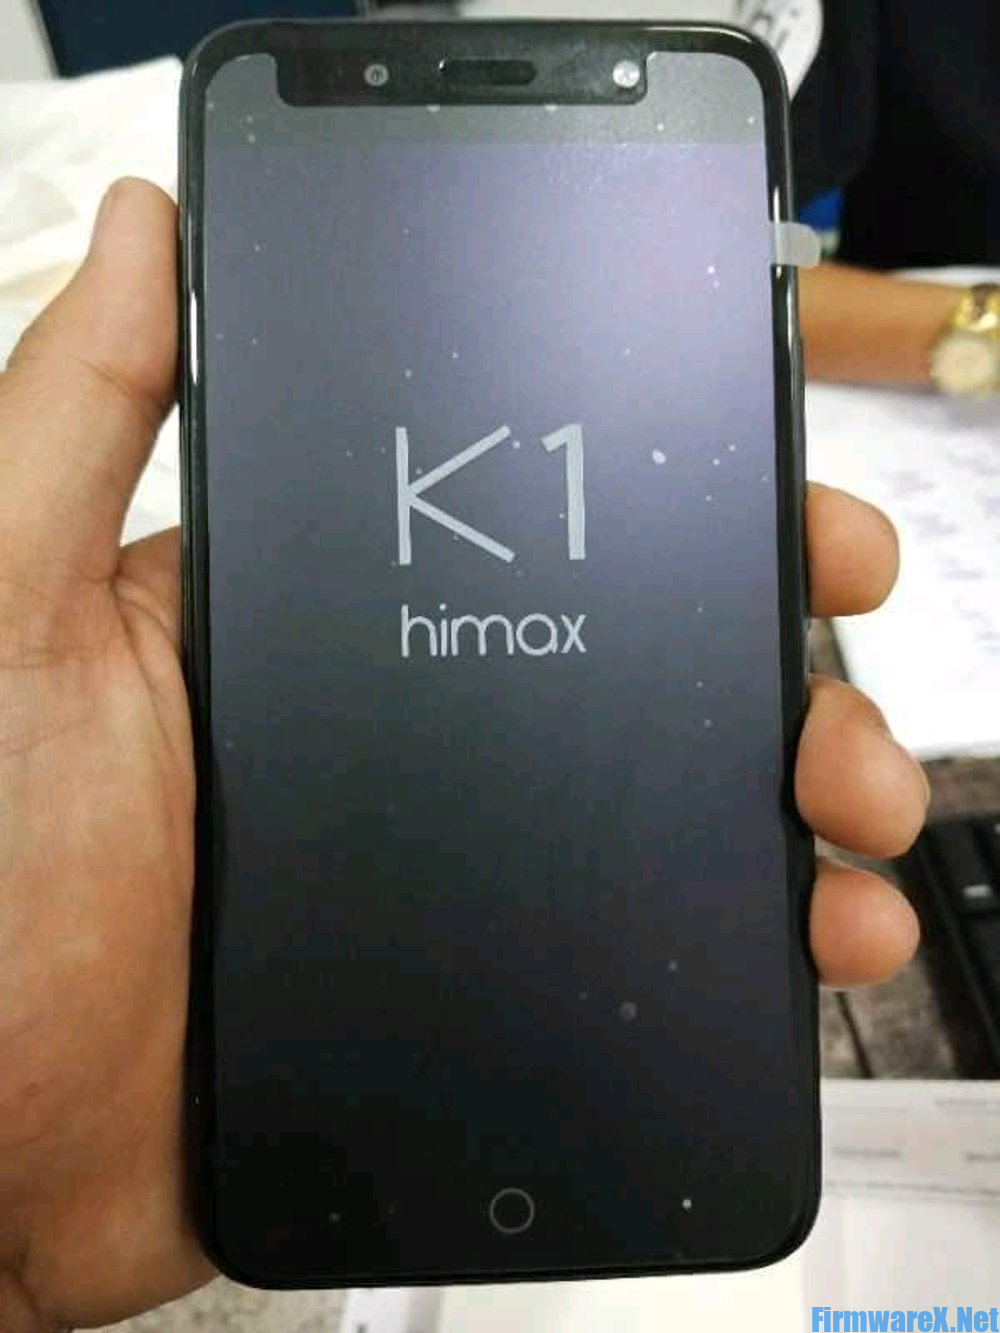 Himax King K2 M25s Firmware ROM